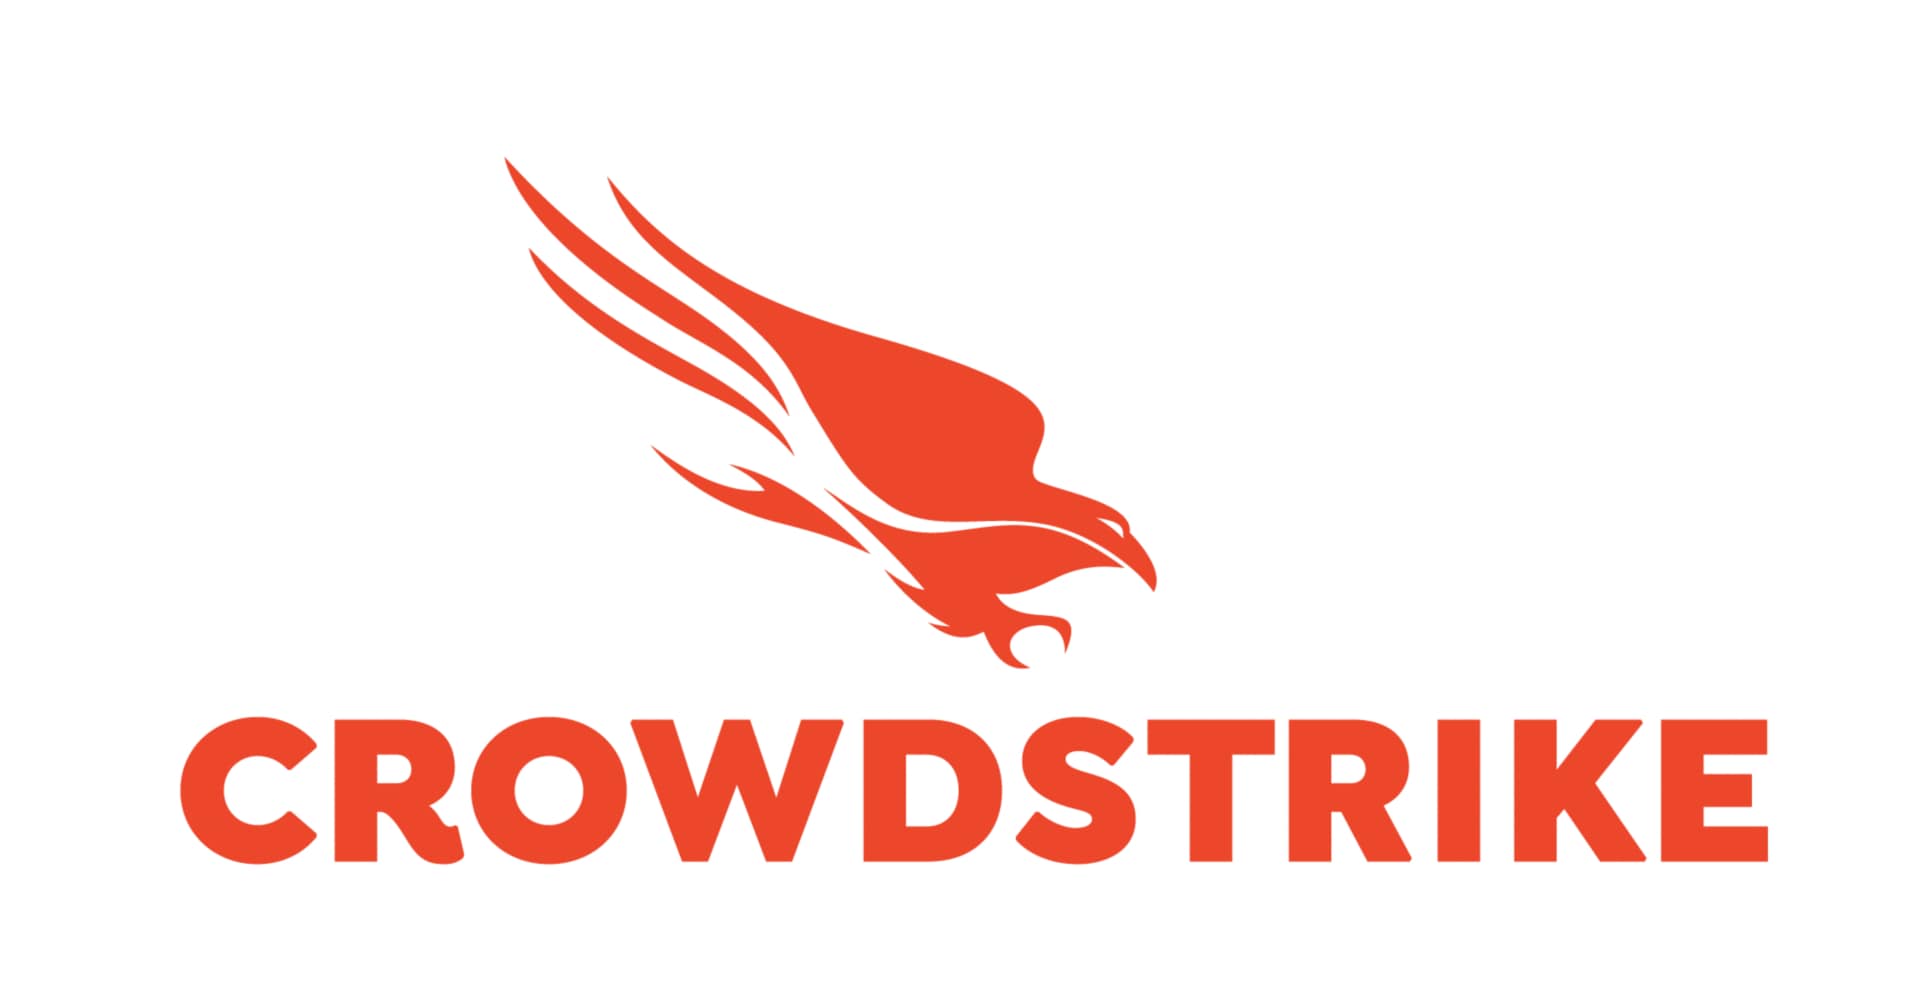 CrowdStrike 12-Month Professional Services - Prepaid Retainer SOW